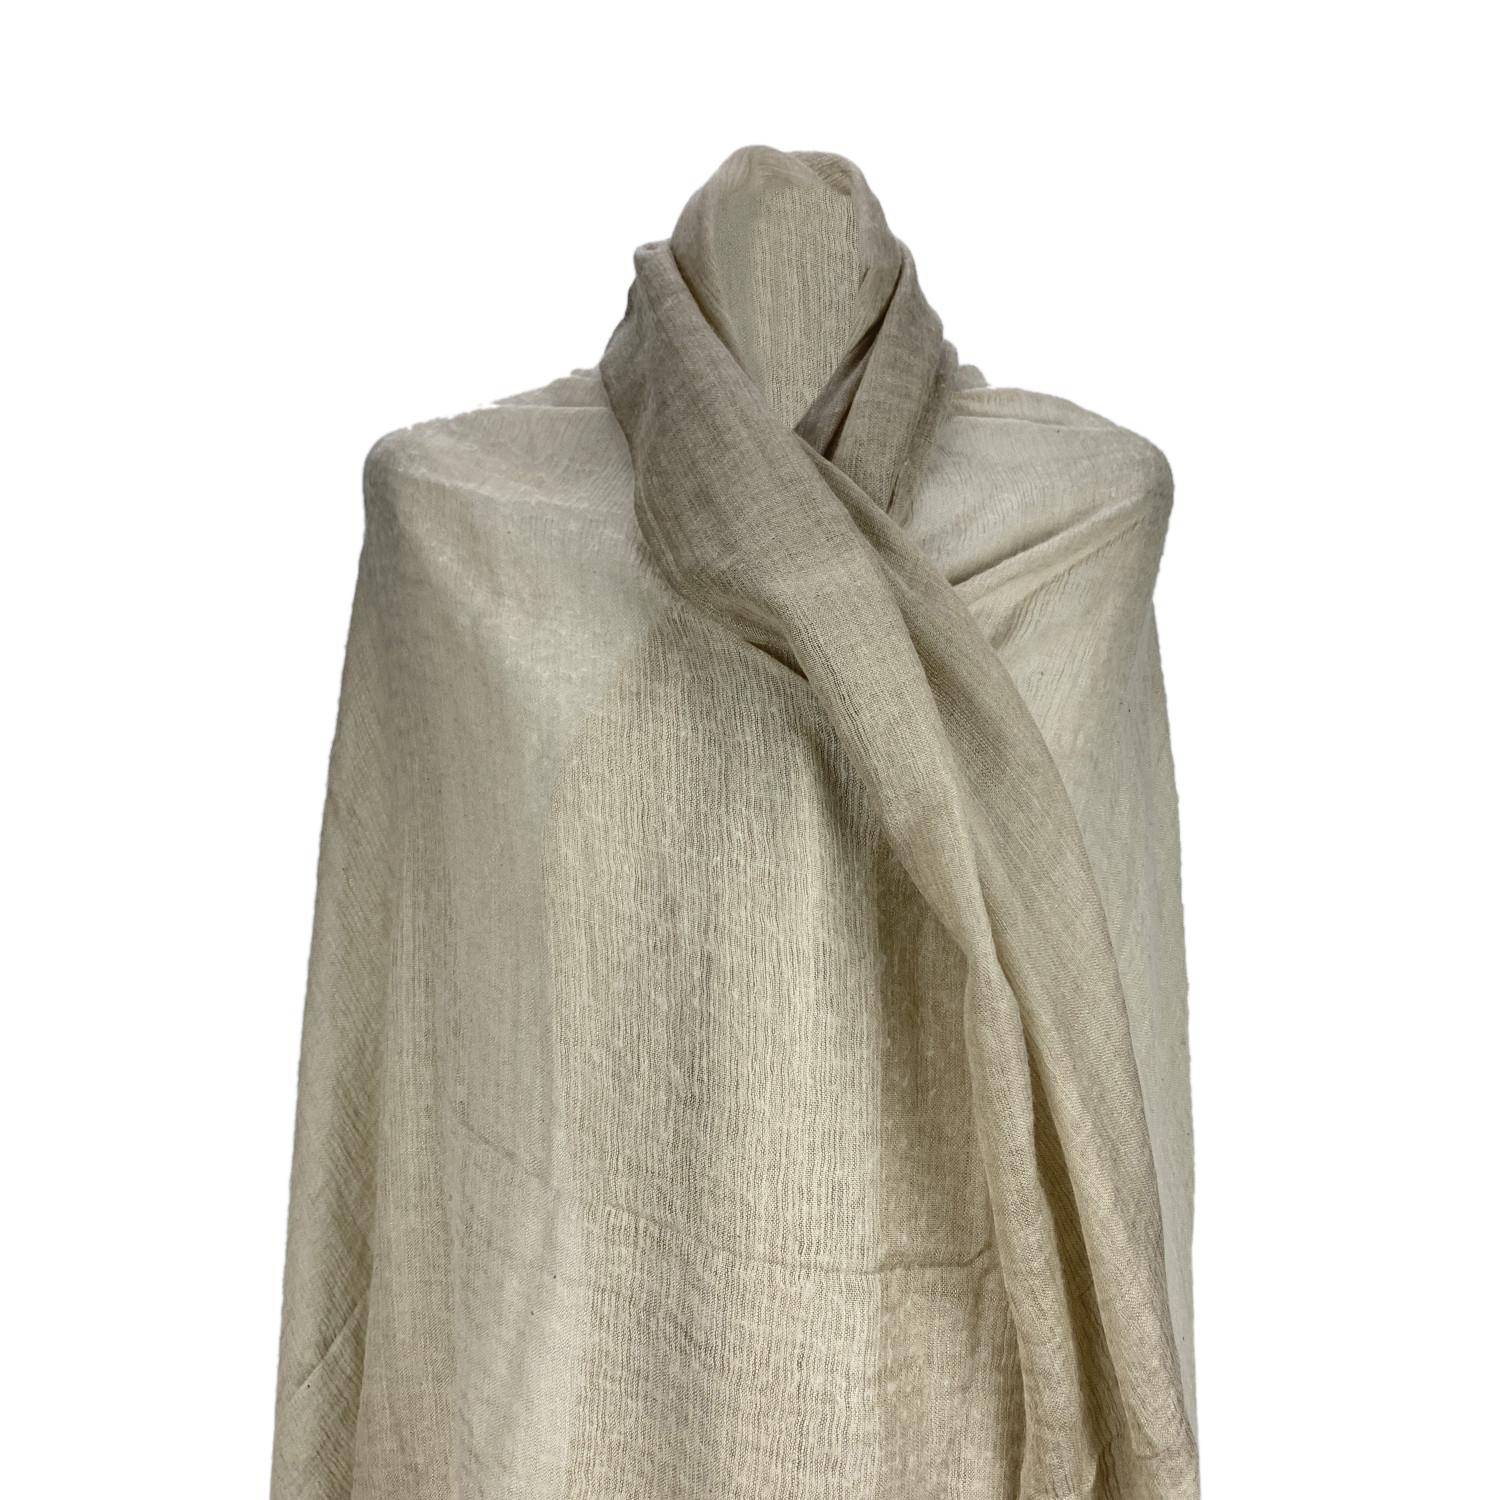 Hermes Beige Cashmere and Silk Large Scarf Shawl Stole In Excellent Condition In Rome, Rome